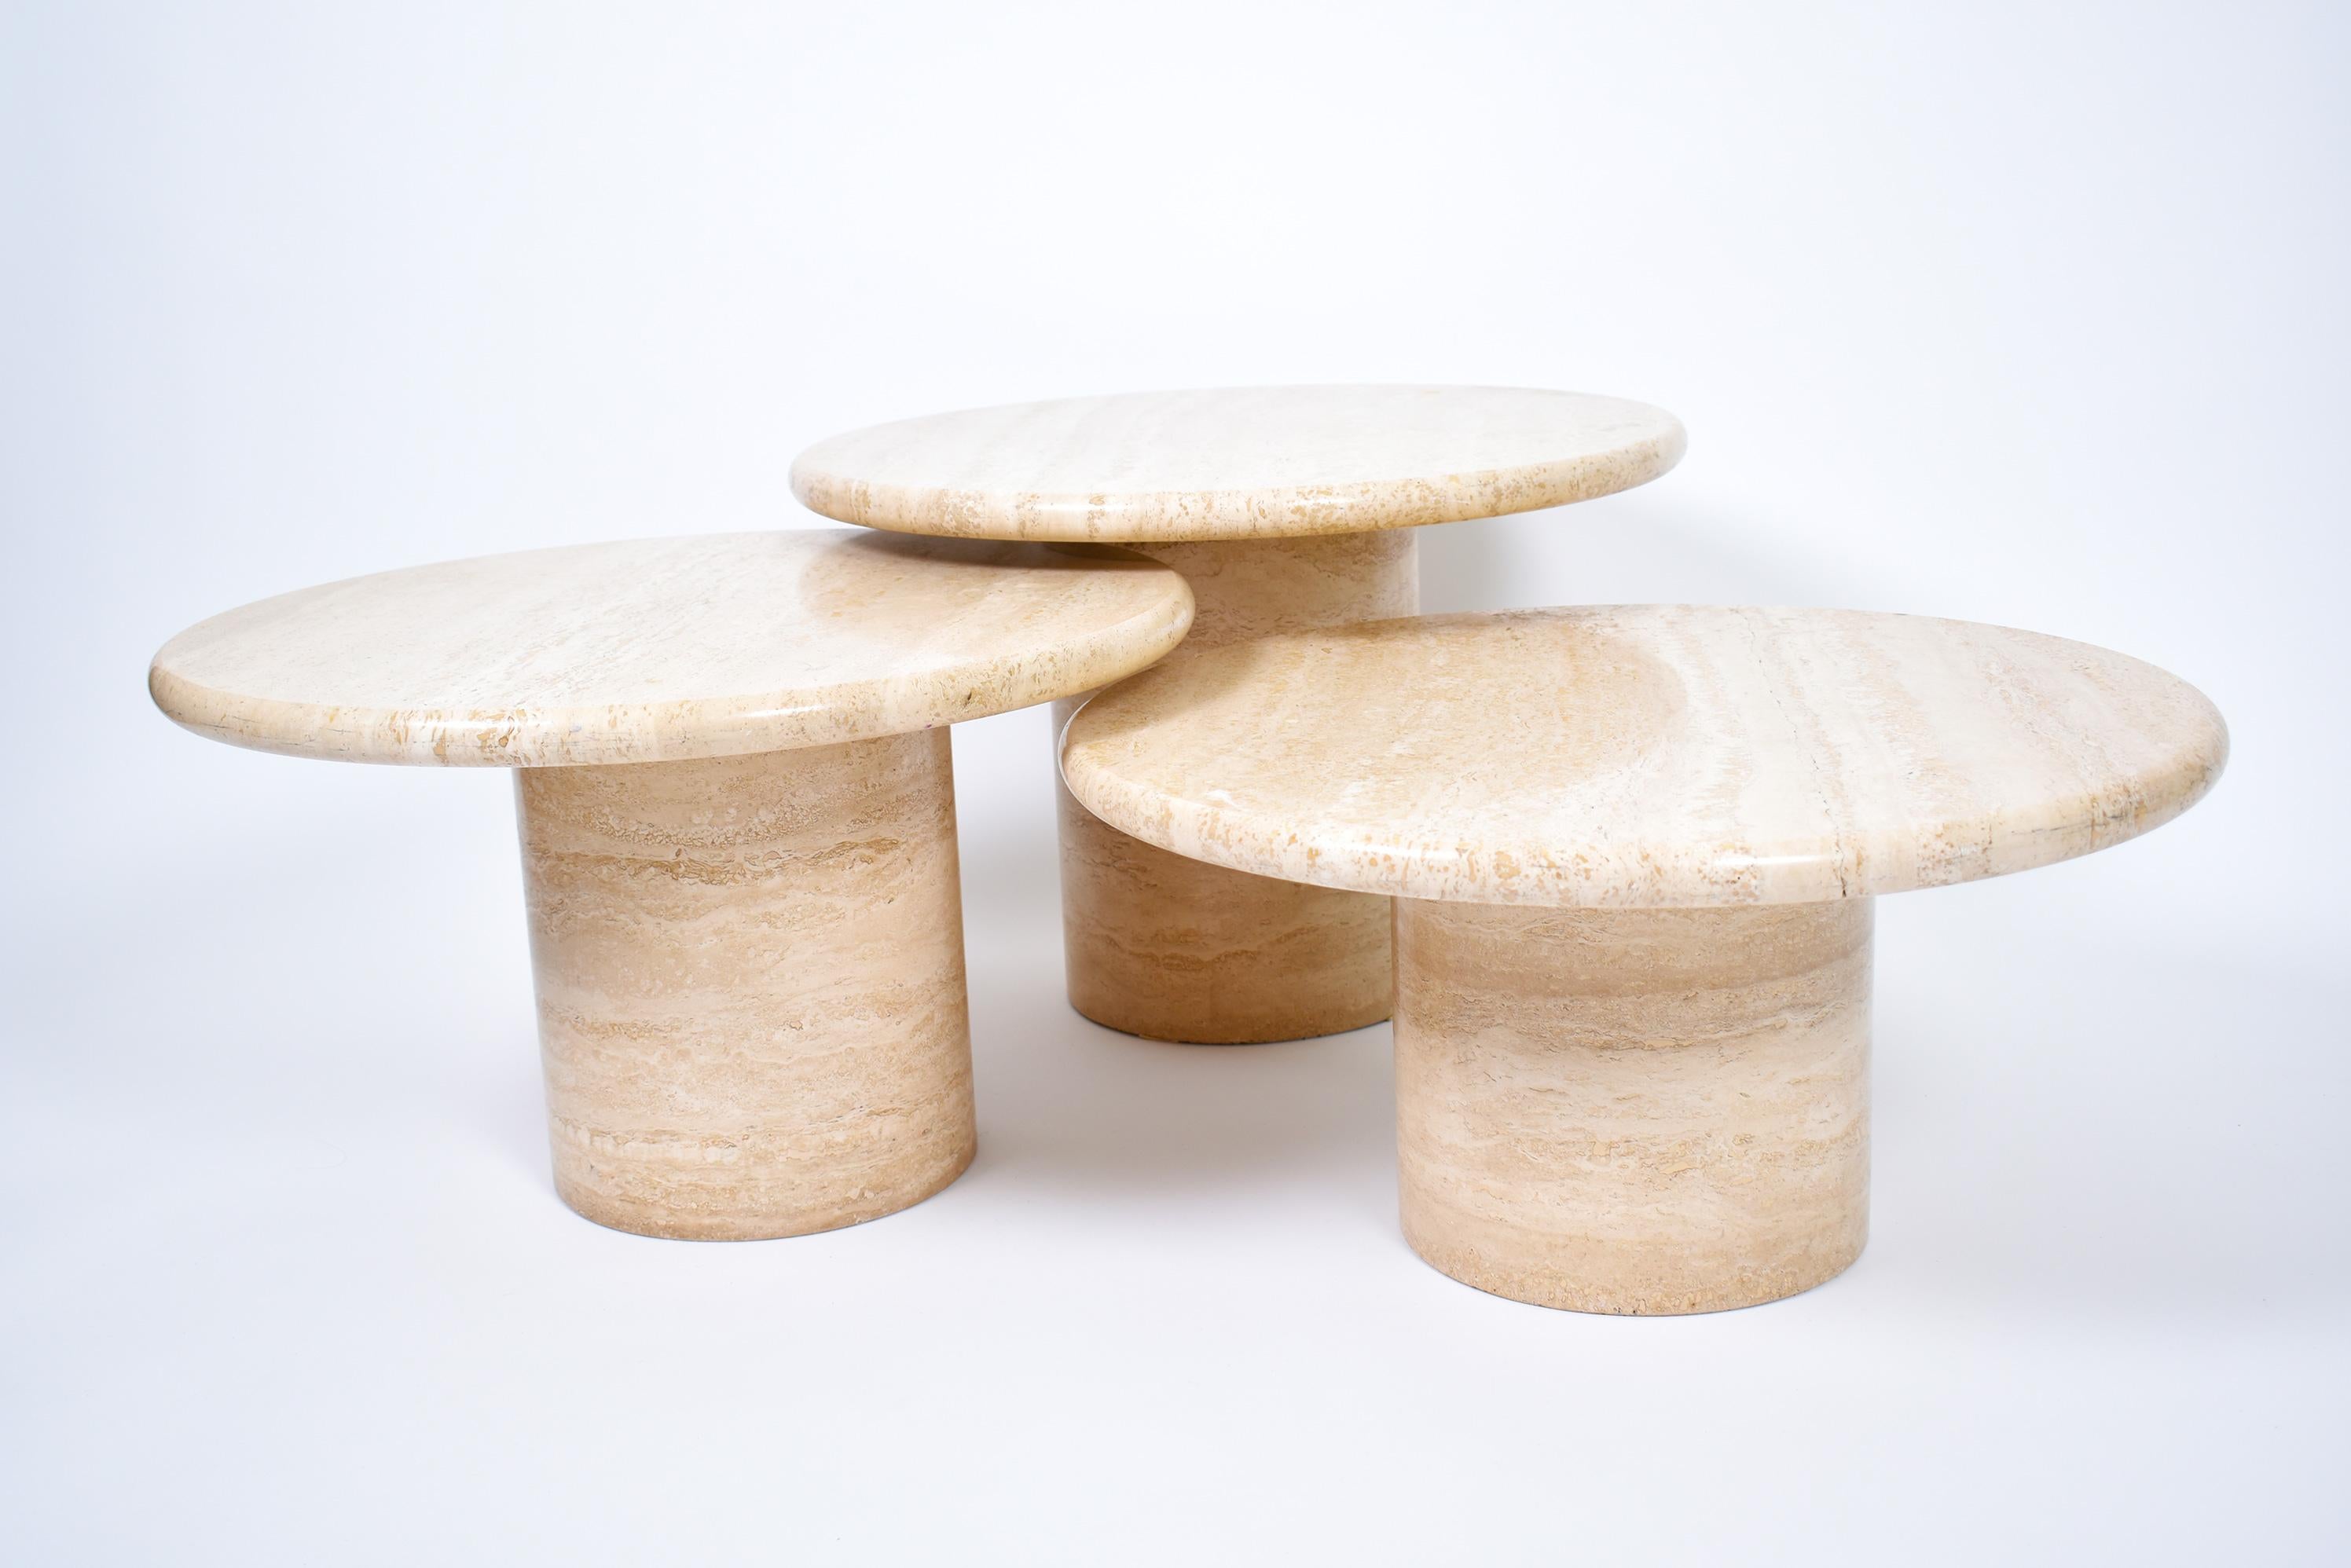 Set of three Mid-Century Modern travertine coffee tables, on round pedestal legs.

These round tables have different heights, allowing a free, creative and even overlapping disposition.
True eye-catcher, the travertine has beautiful lines and is